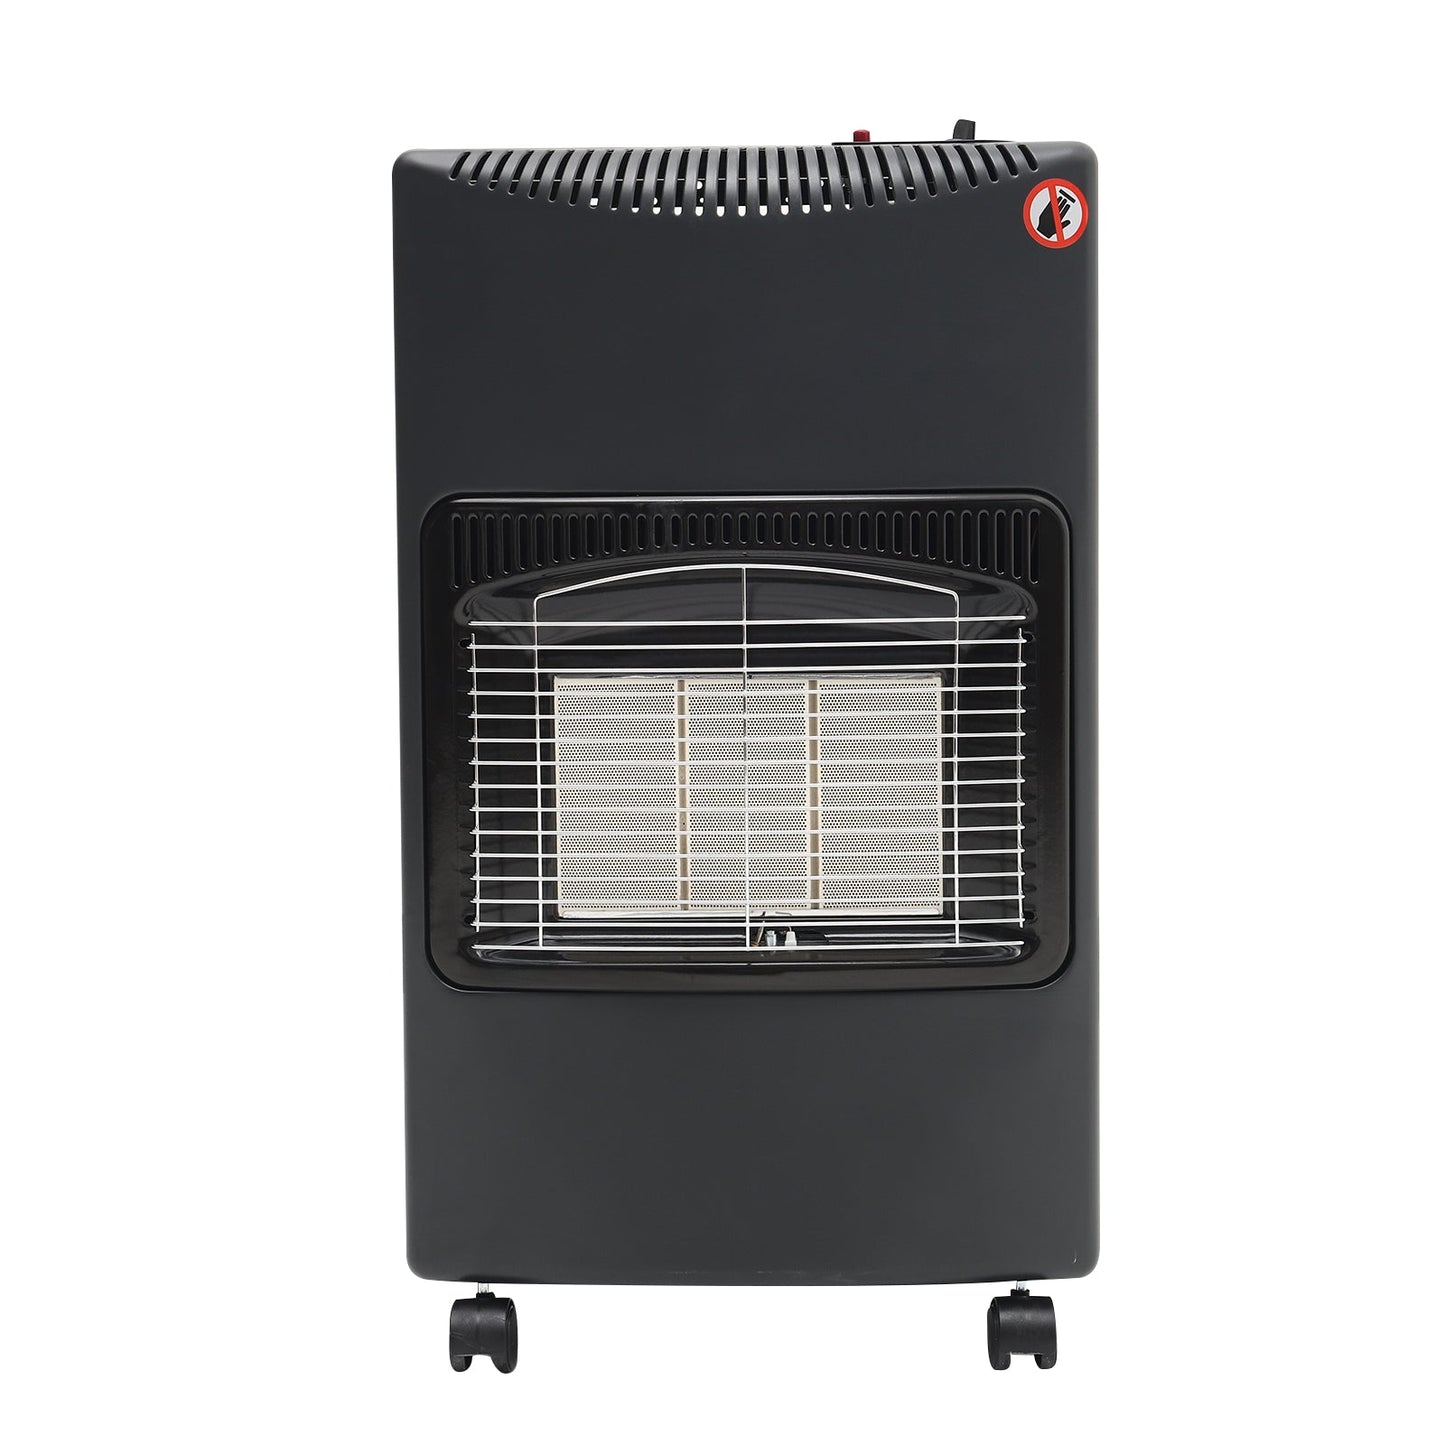 Ceramic Gas Heater with Wheels for Indoor and Outdoor